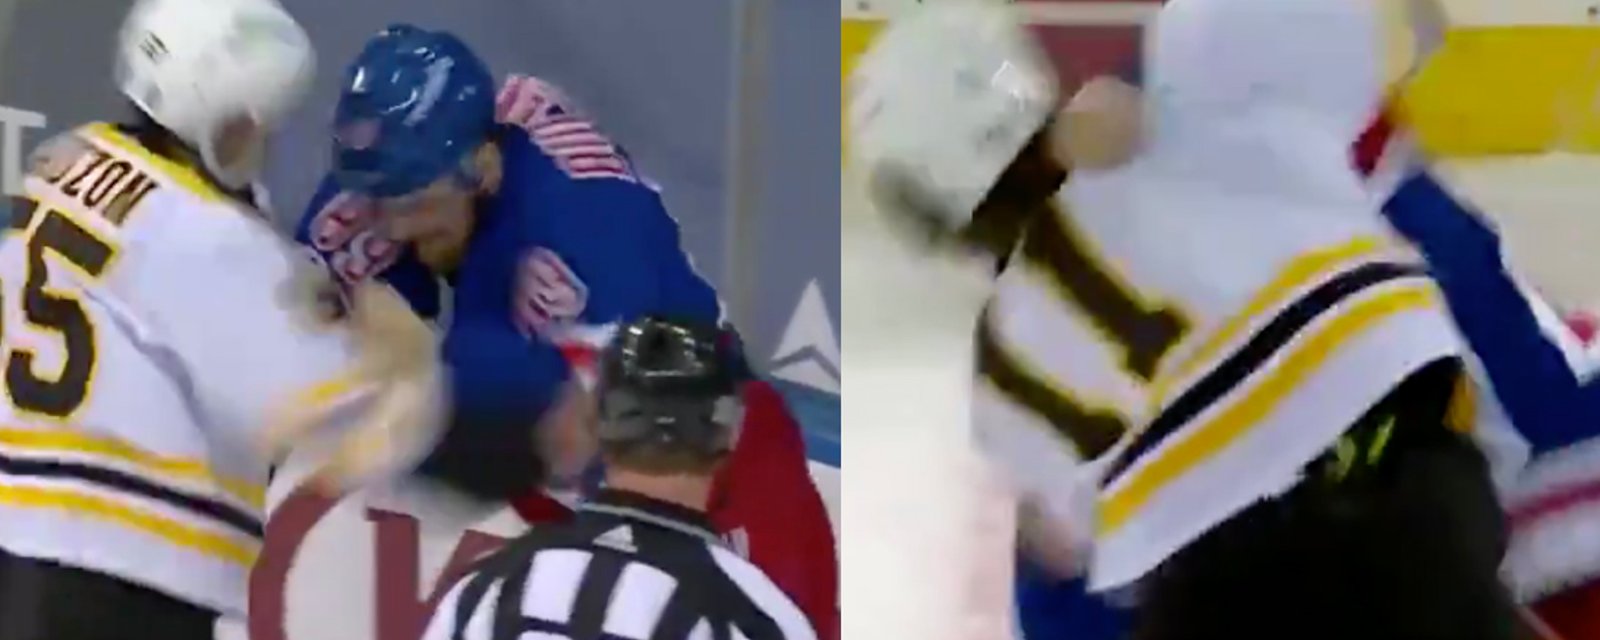 FIGHT NIGHT in NYC between the Bruins and Rangers! 